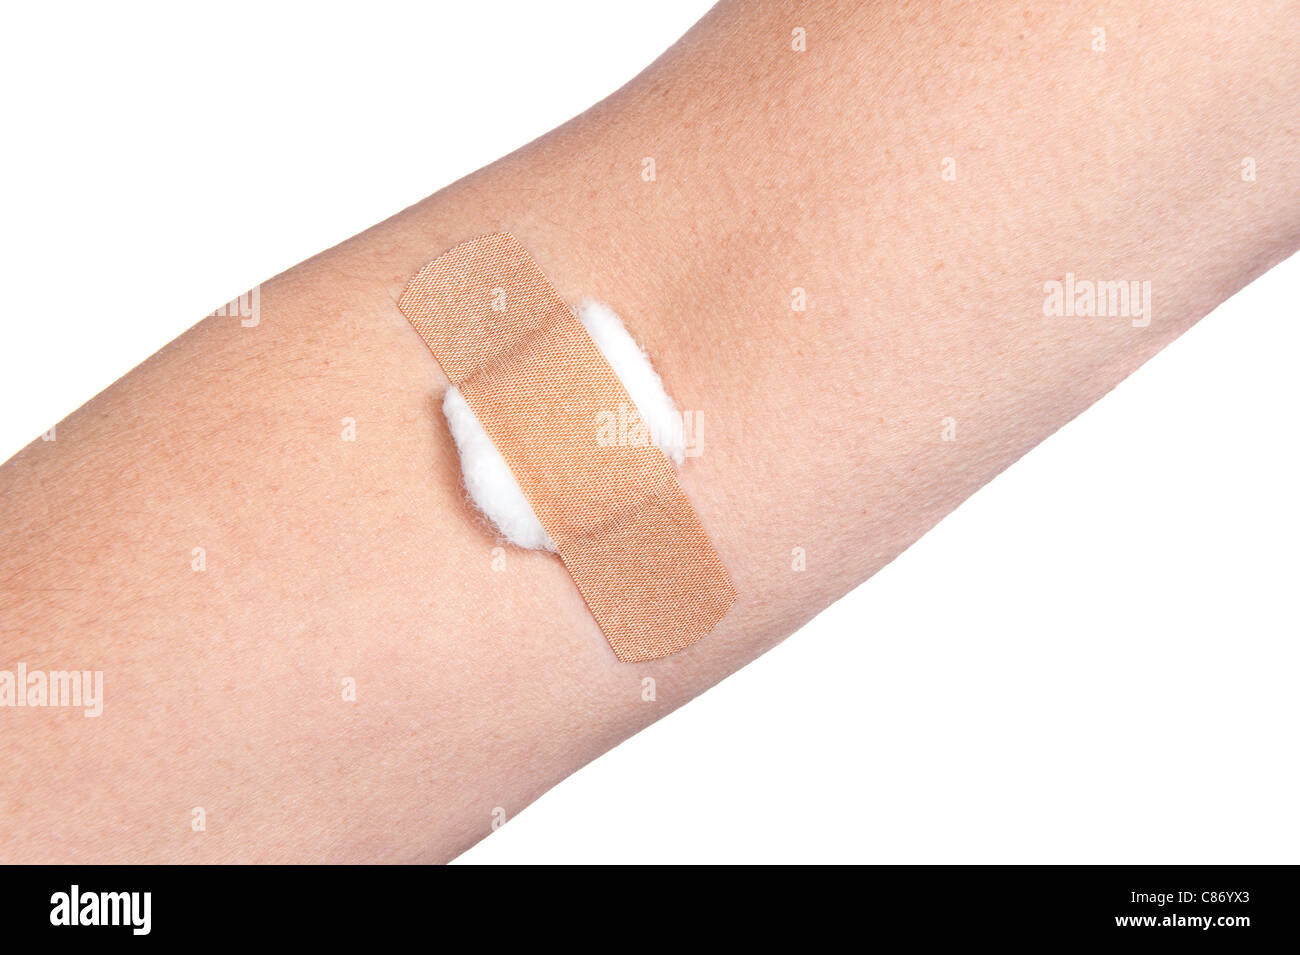 A person medically dressed with a cotton ball and bandage over a wound. Stock Photo